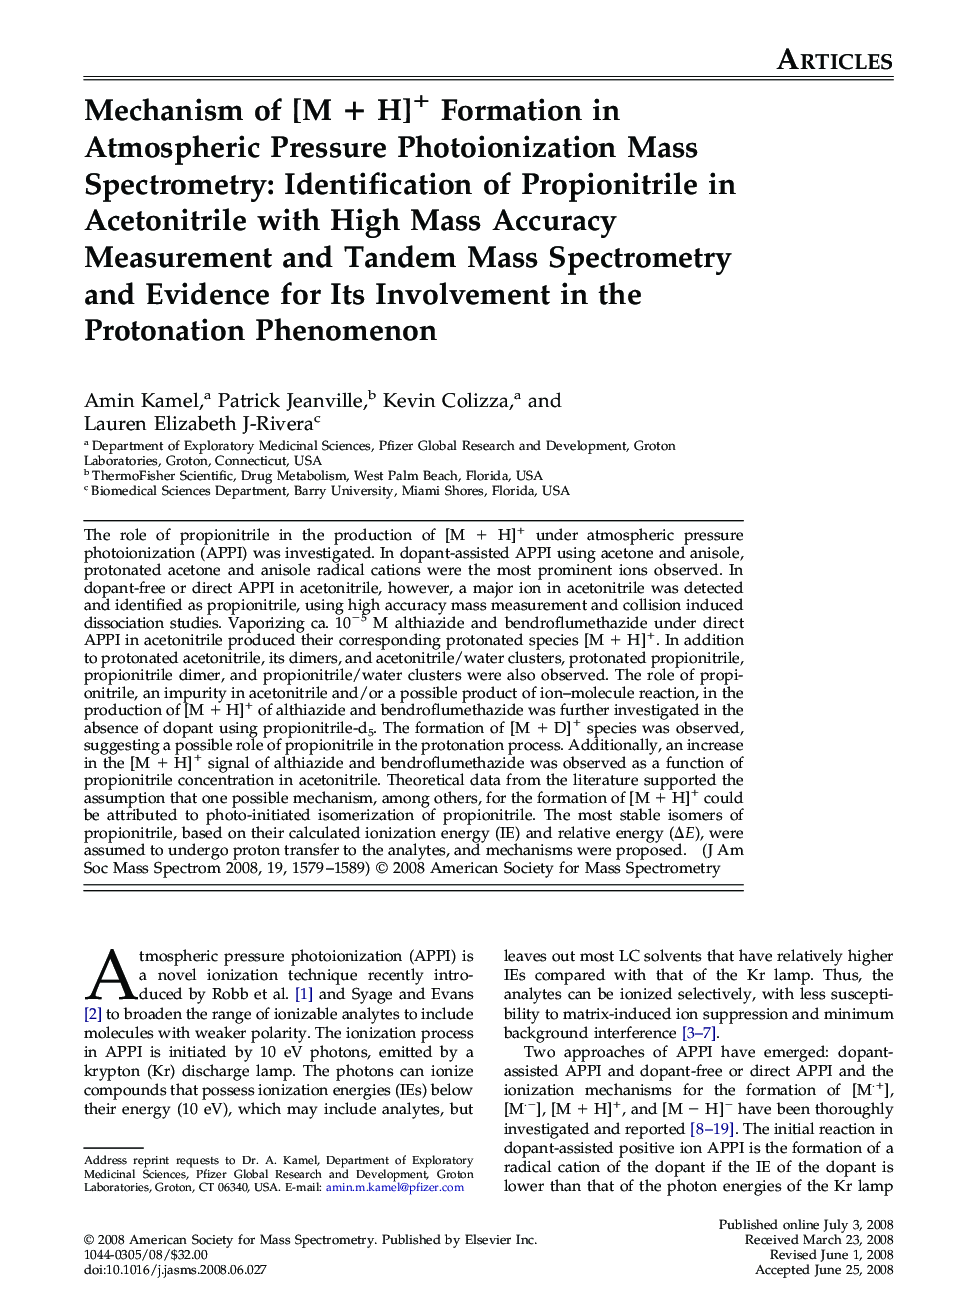 Mechanism of [M + H]+ Formation in Atmospheric Pressure Photoionization Mass Spectrometry: Identification of Propionitrile in Acetonitrile with High Mass Accuracy Measurement and Tandem Mass Spectrometry and Evidence for Its Involvement in the Protonation